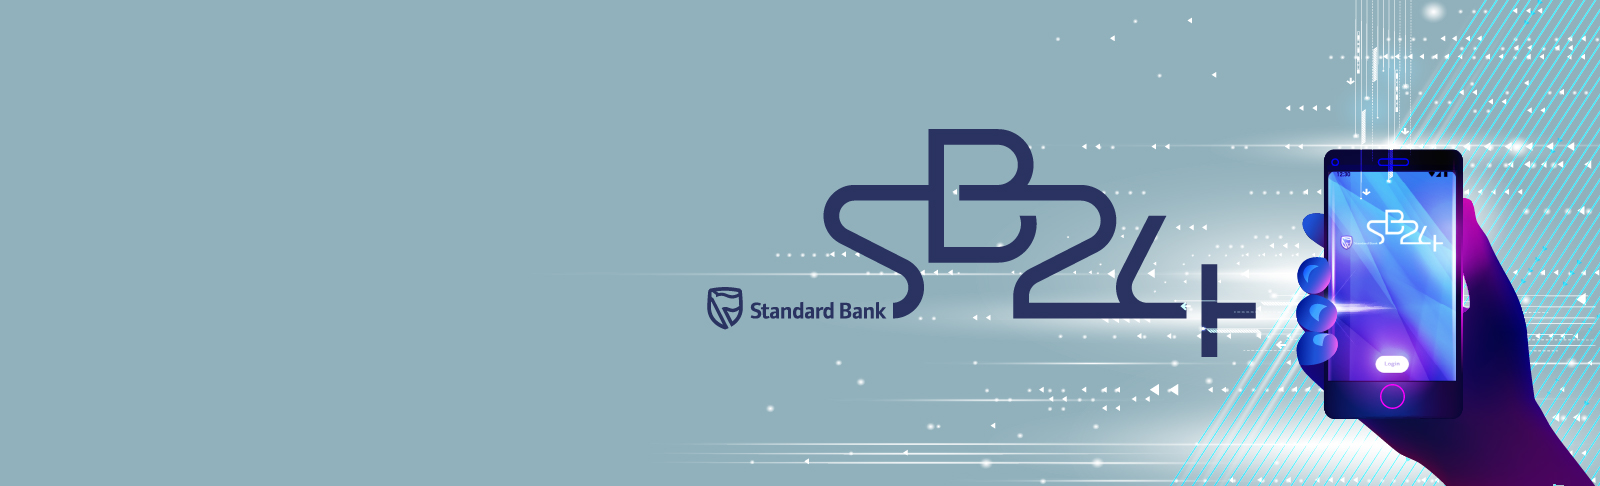 banner for product sb24 page